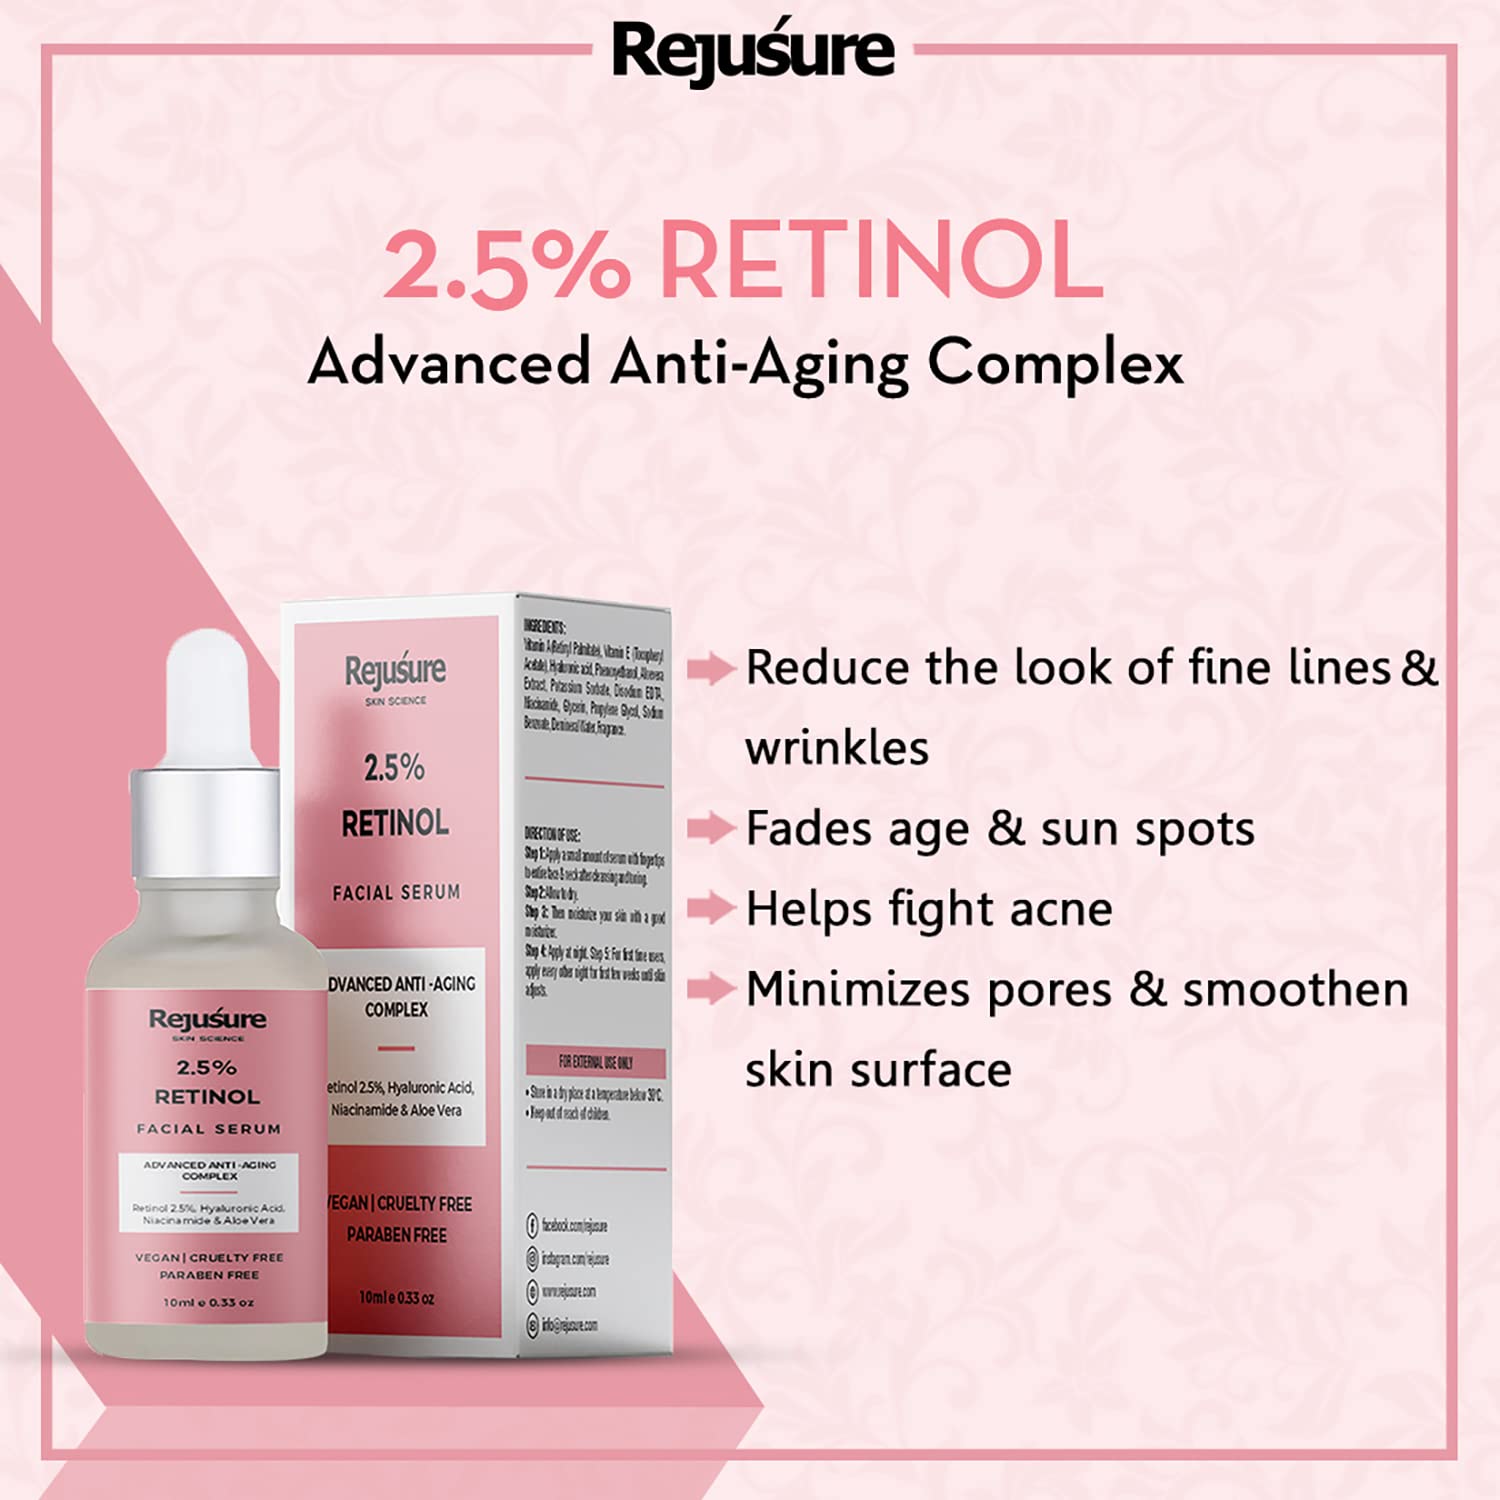 Rejusure 2.5% Retinol face Serum for Anti Aging, Night Face Serum with Retinol to Reduce Fine Lines & Wrinkles, Promotes Cell Turnover Youthful & Smooth Skin – 10ml